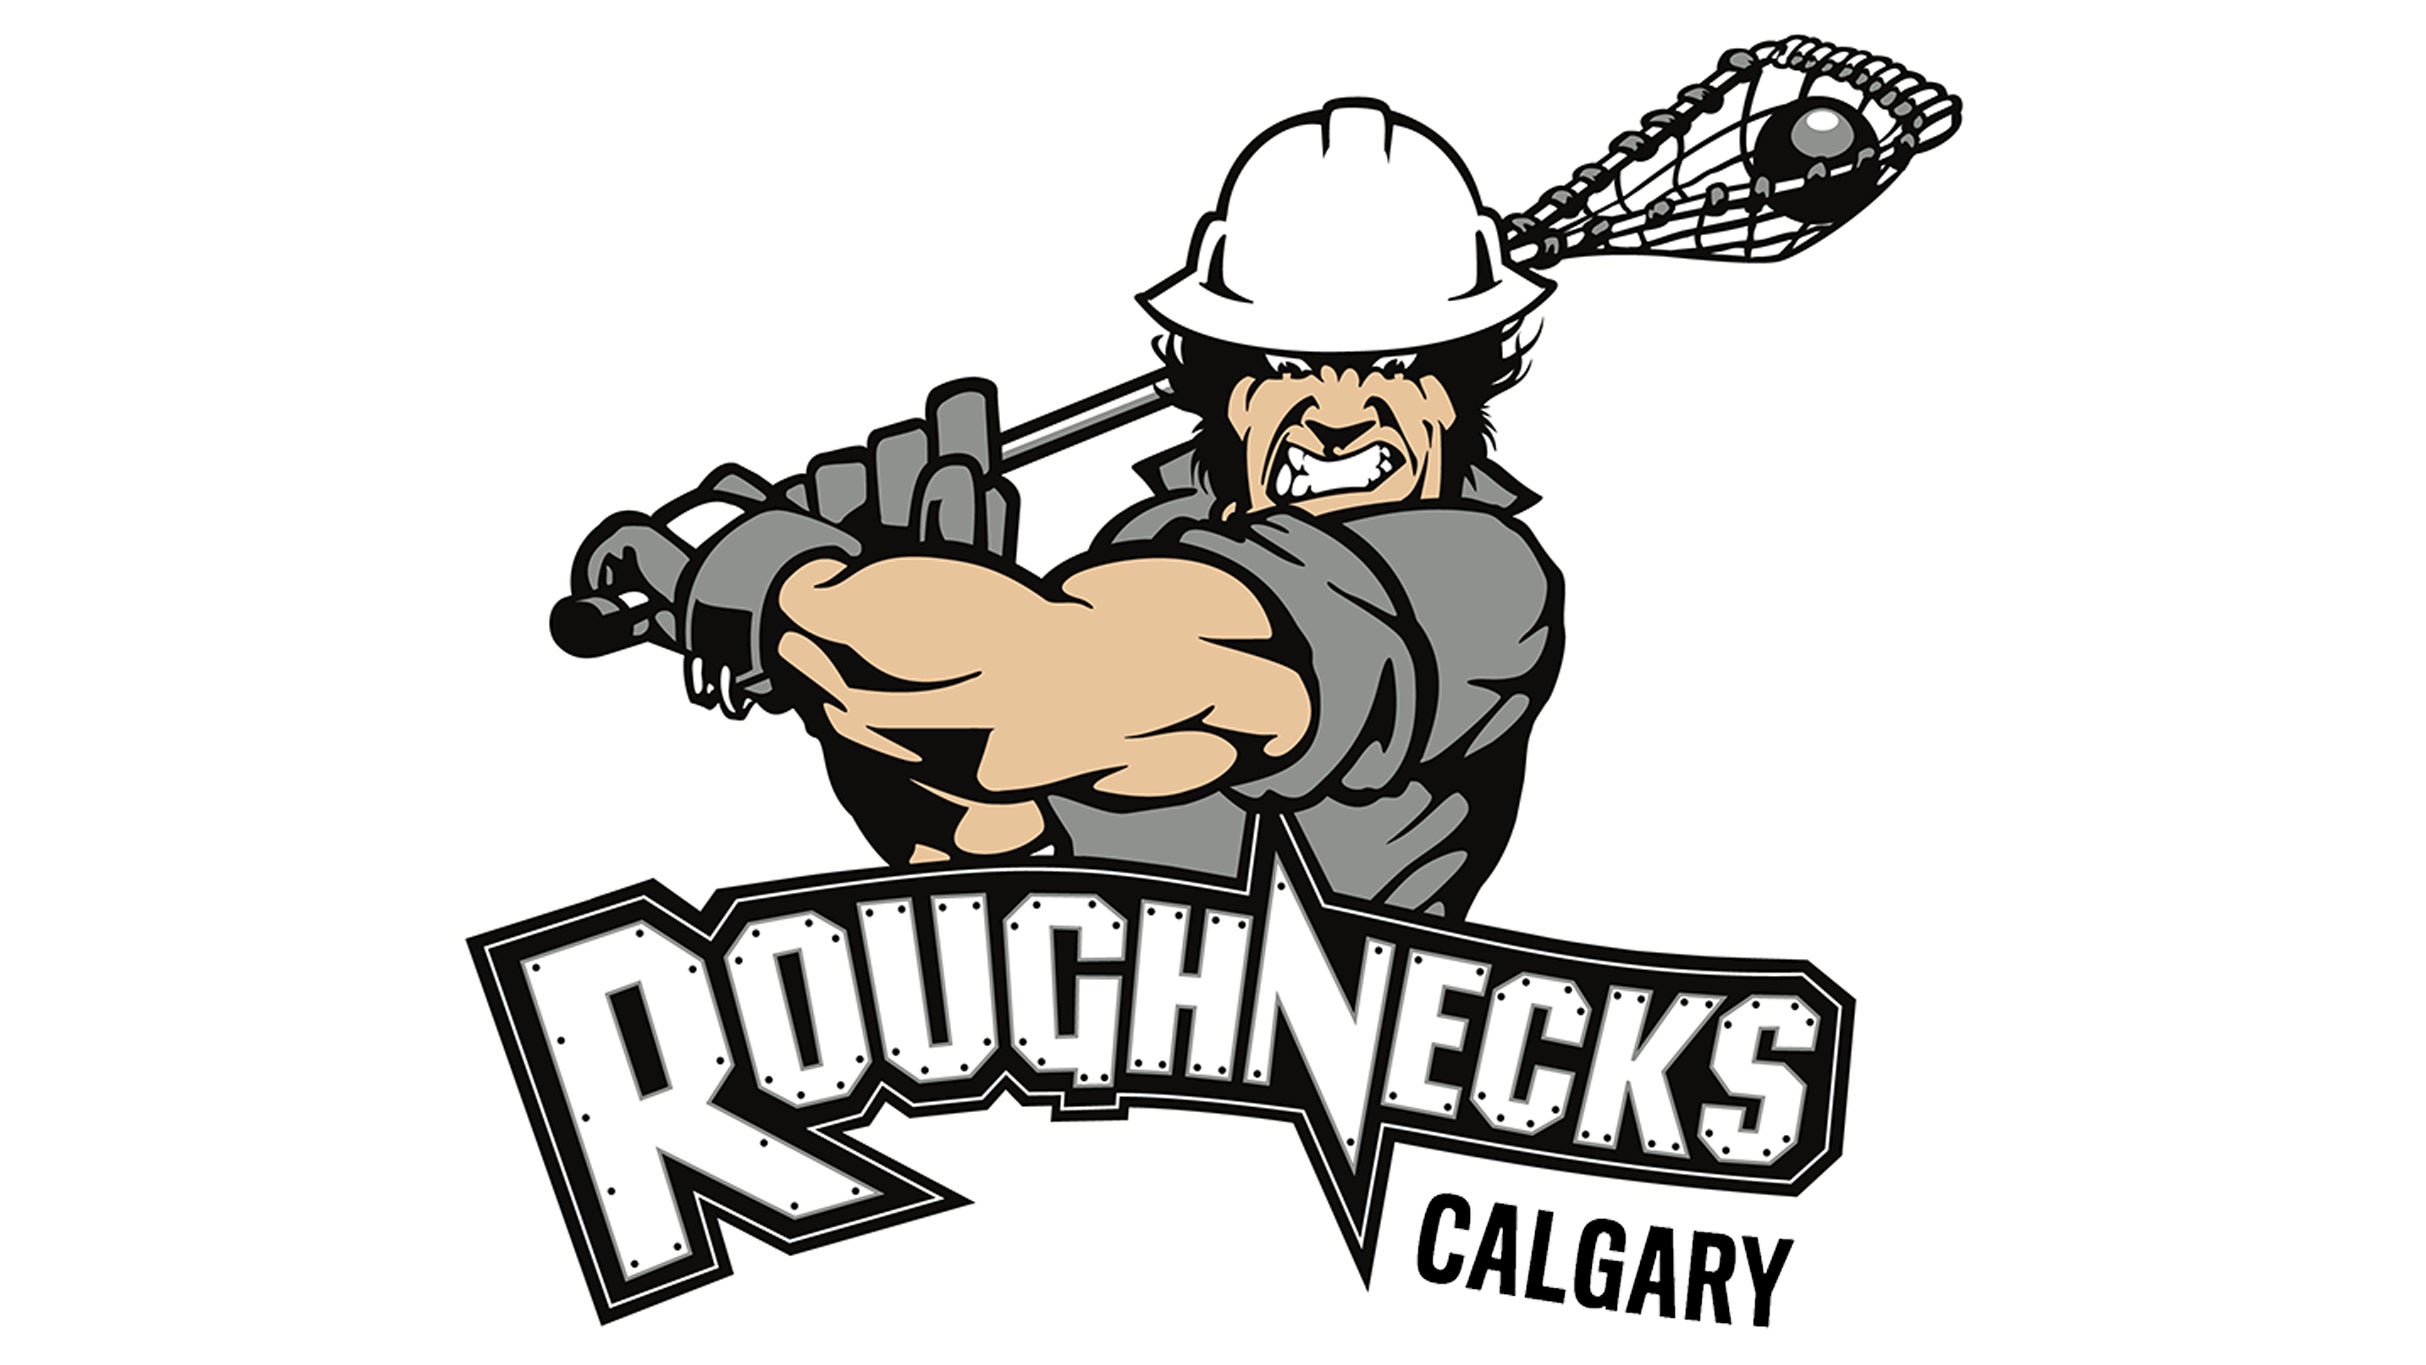 Calgary Roughnecks vs. Panther City Lacrosse Club in Calgary promo photo for Black Friday  presale offer code